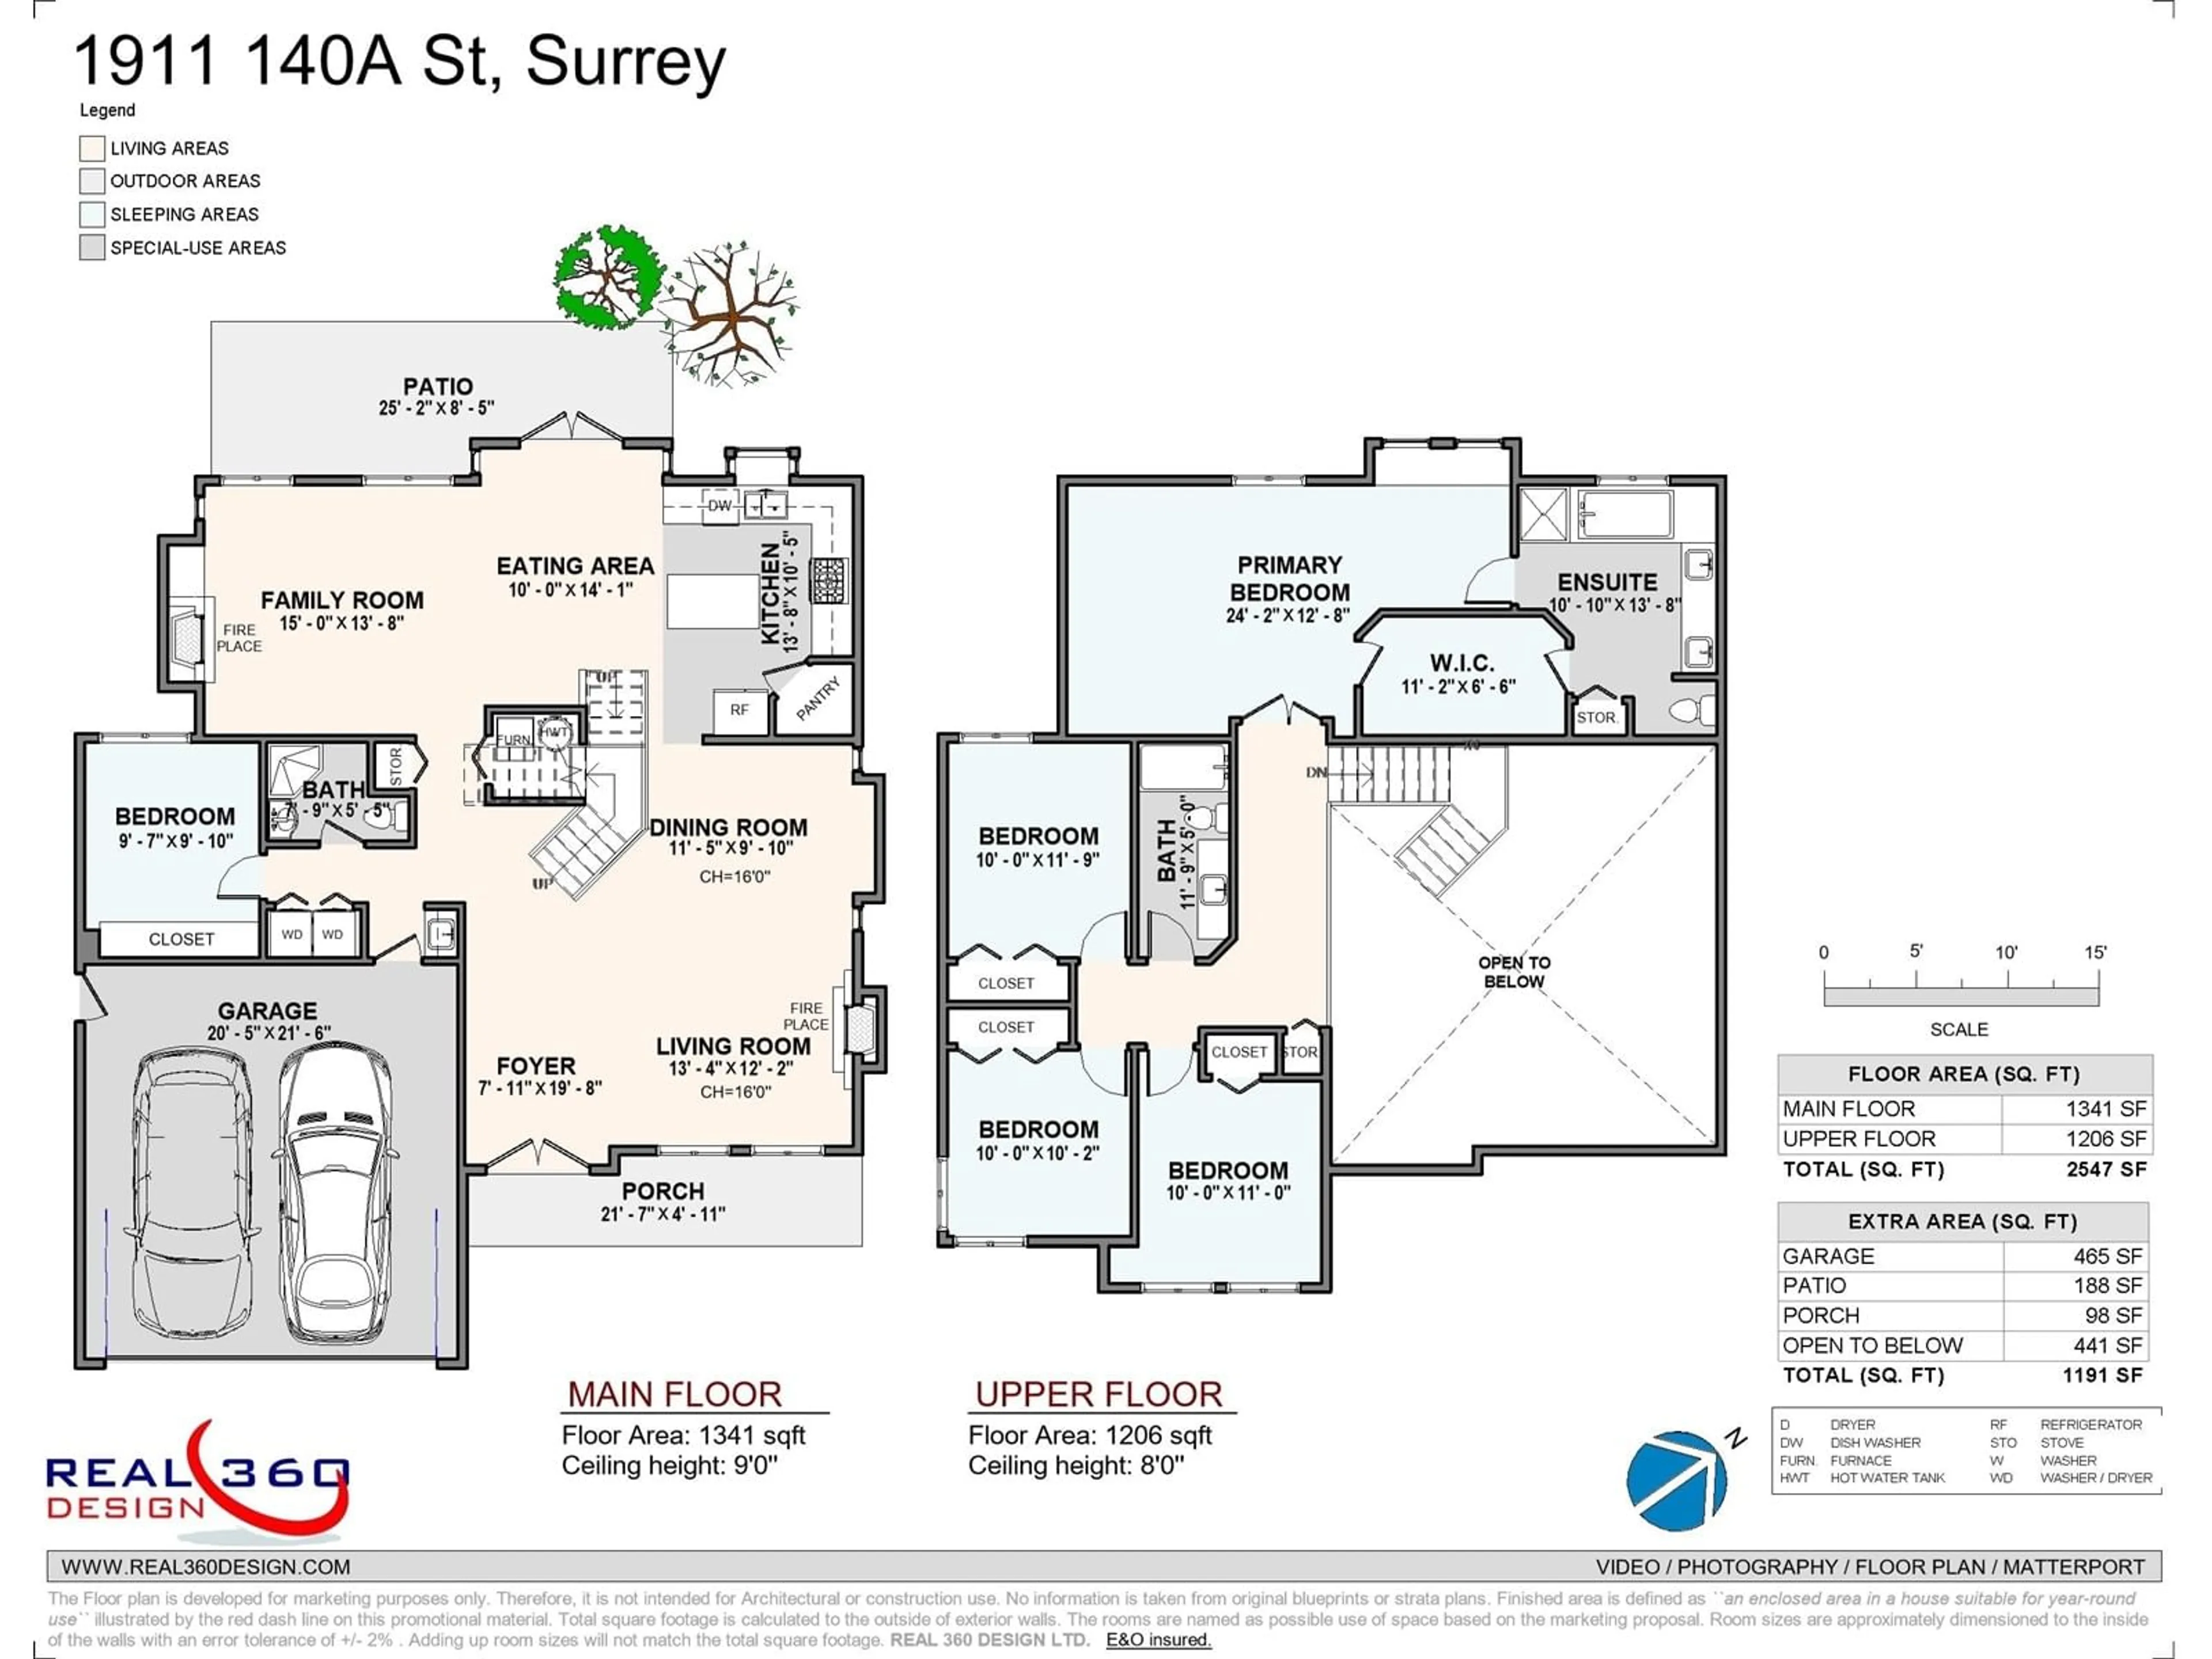 Floor plan for 1911 140A STREET, Surrey British Columbia V4A7Z9